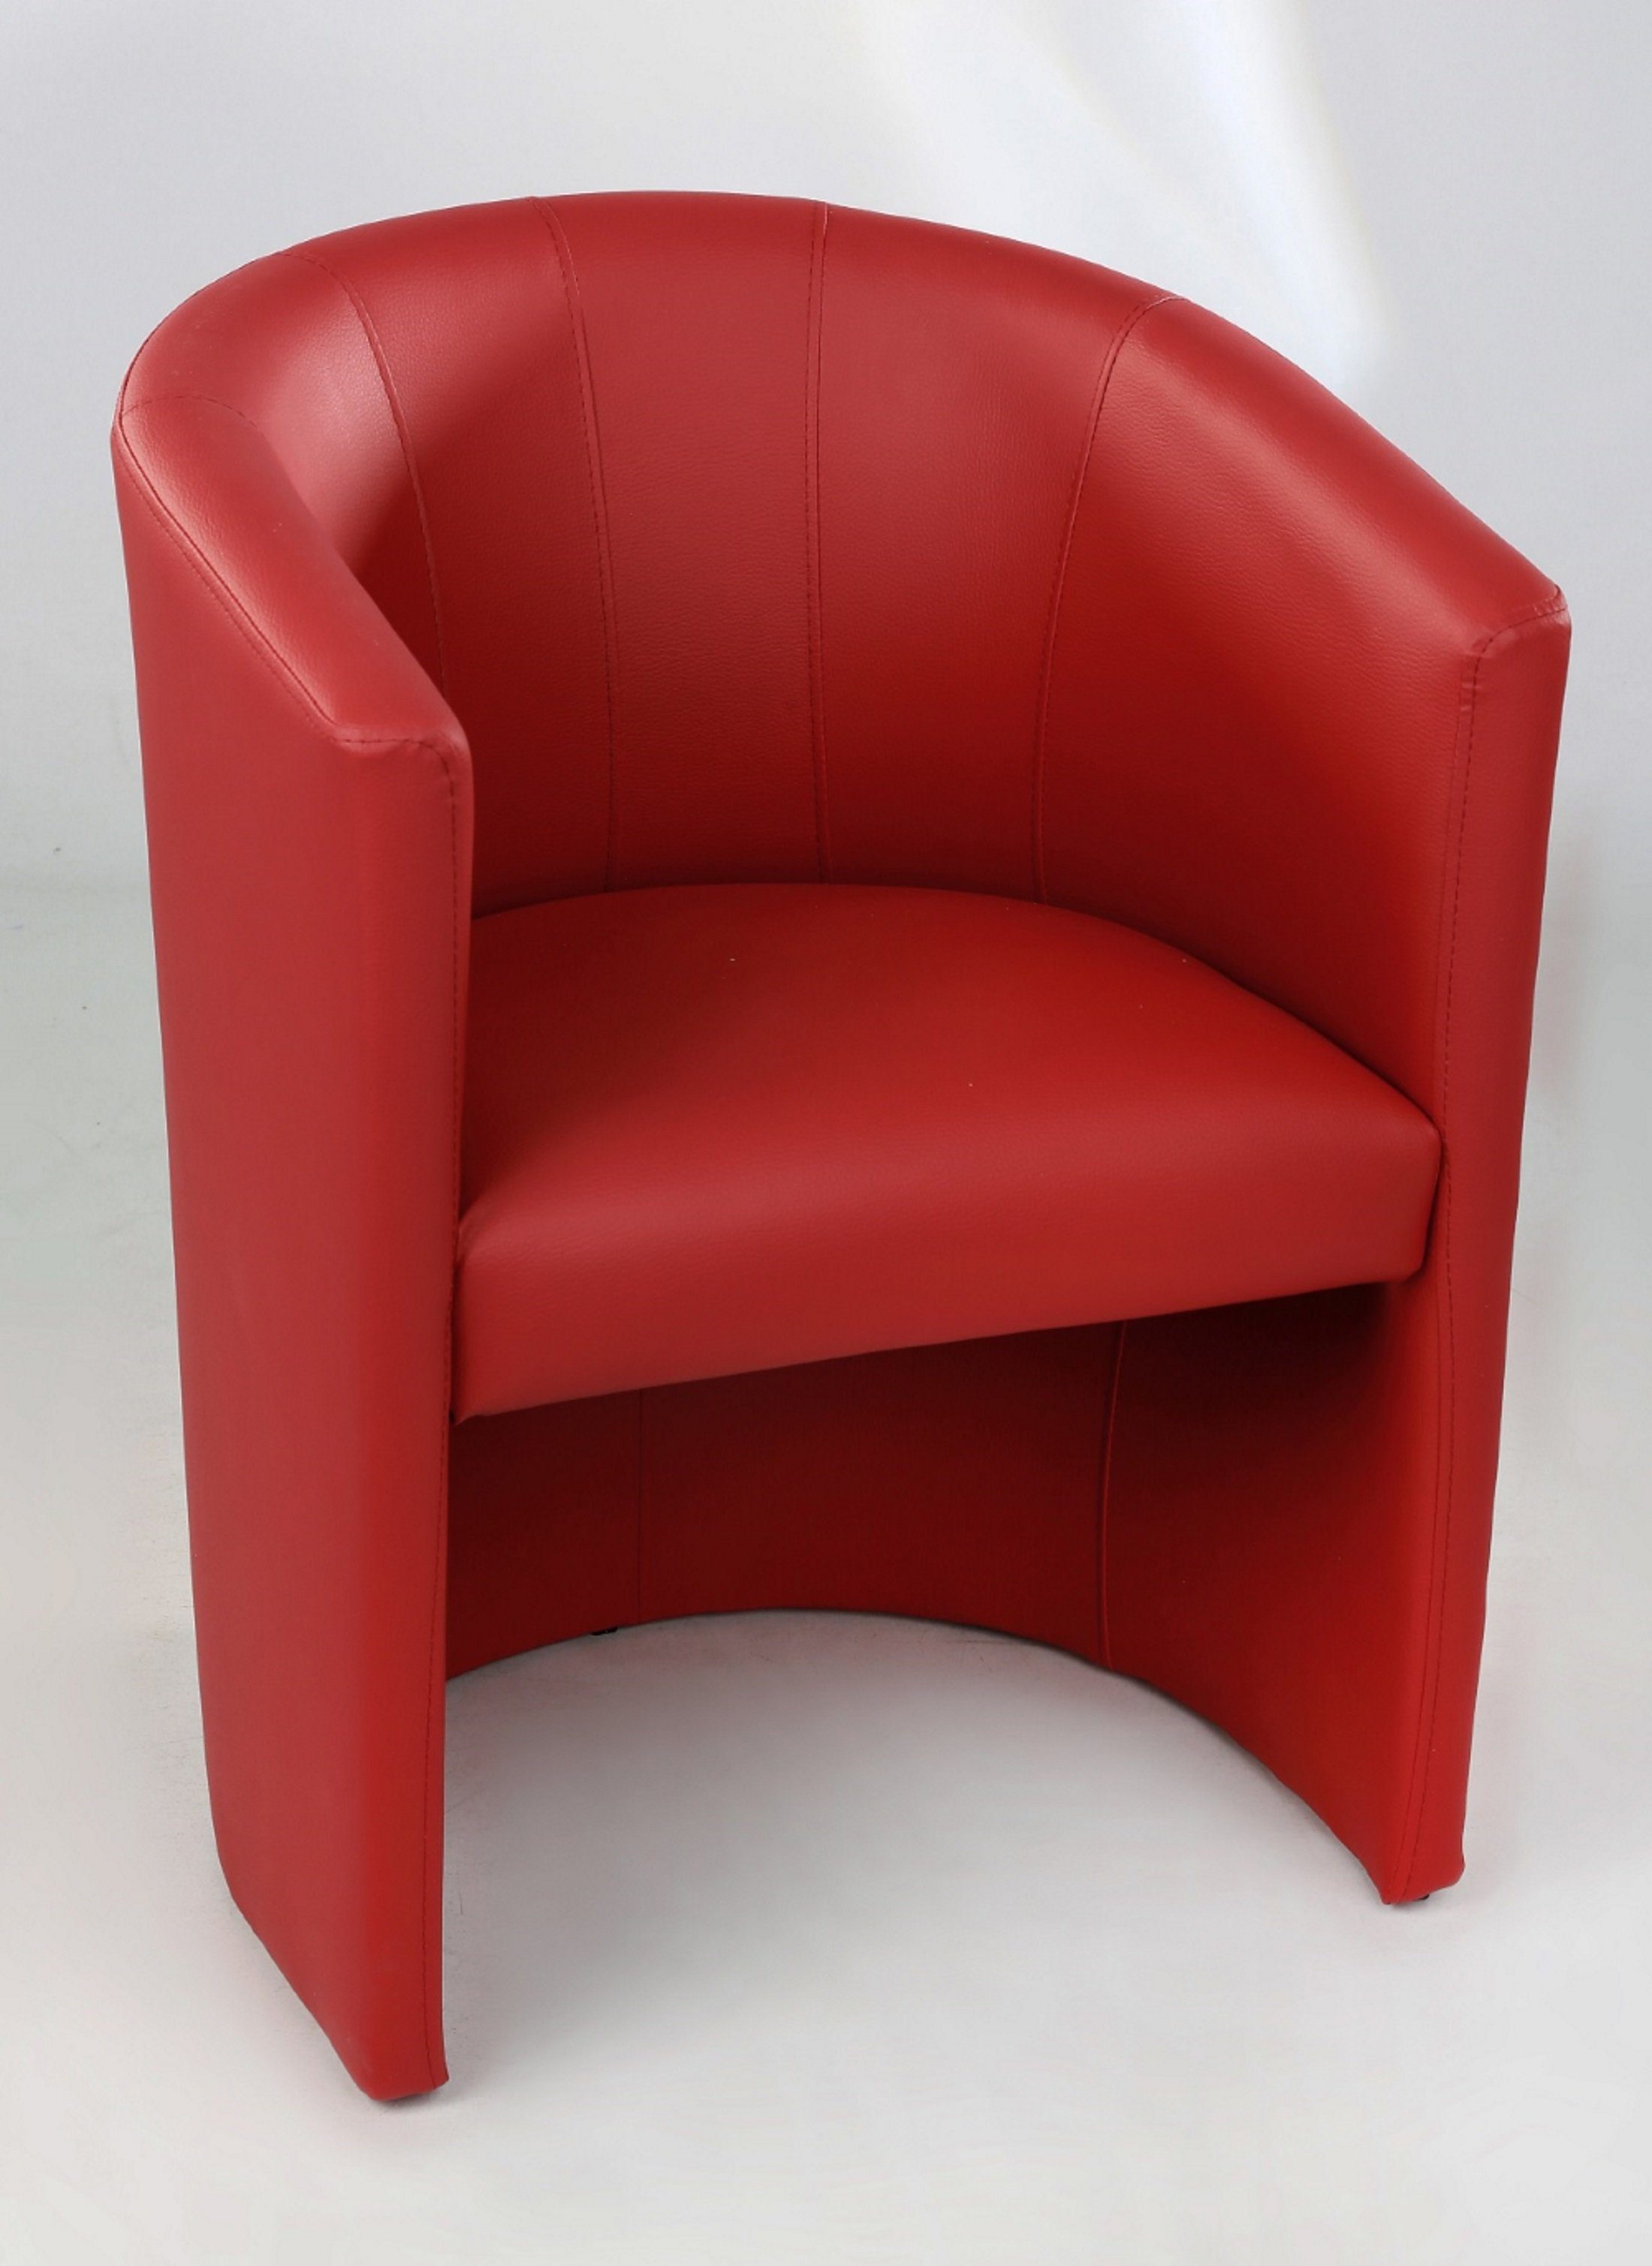 Cocktailsessel Loungesessel Kamil Club Sessel Möbel Clubsessel Farbe Rot Design